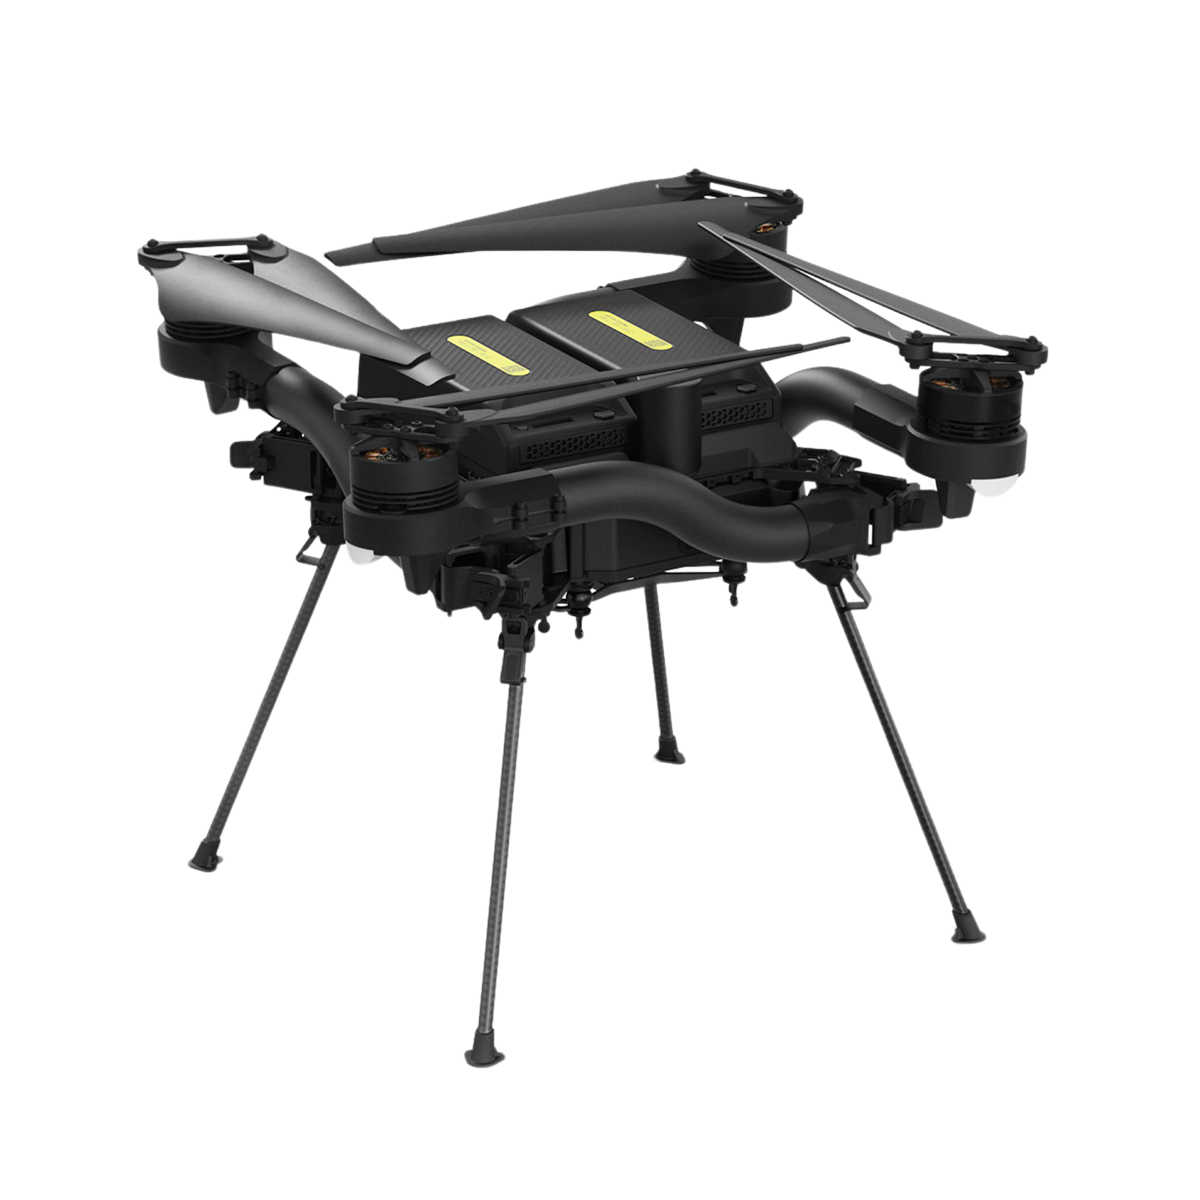 Freefly Astro Map Drone Kit With Sony a7R IV Camera